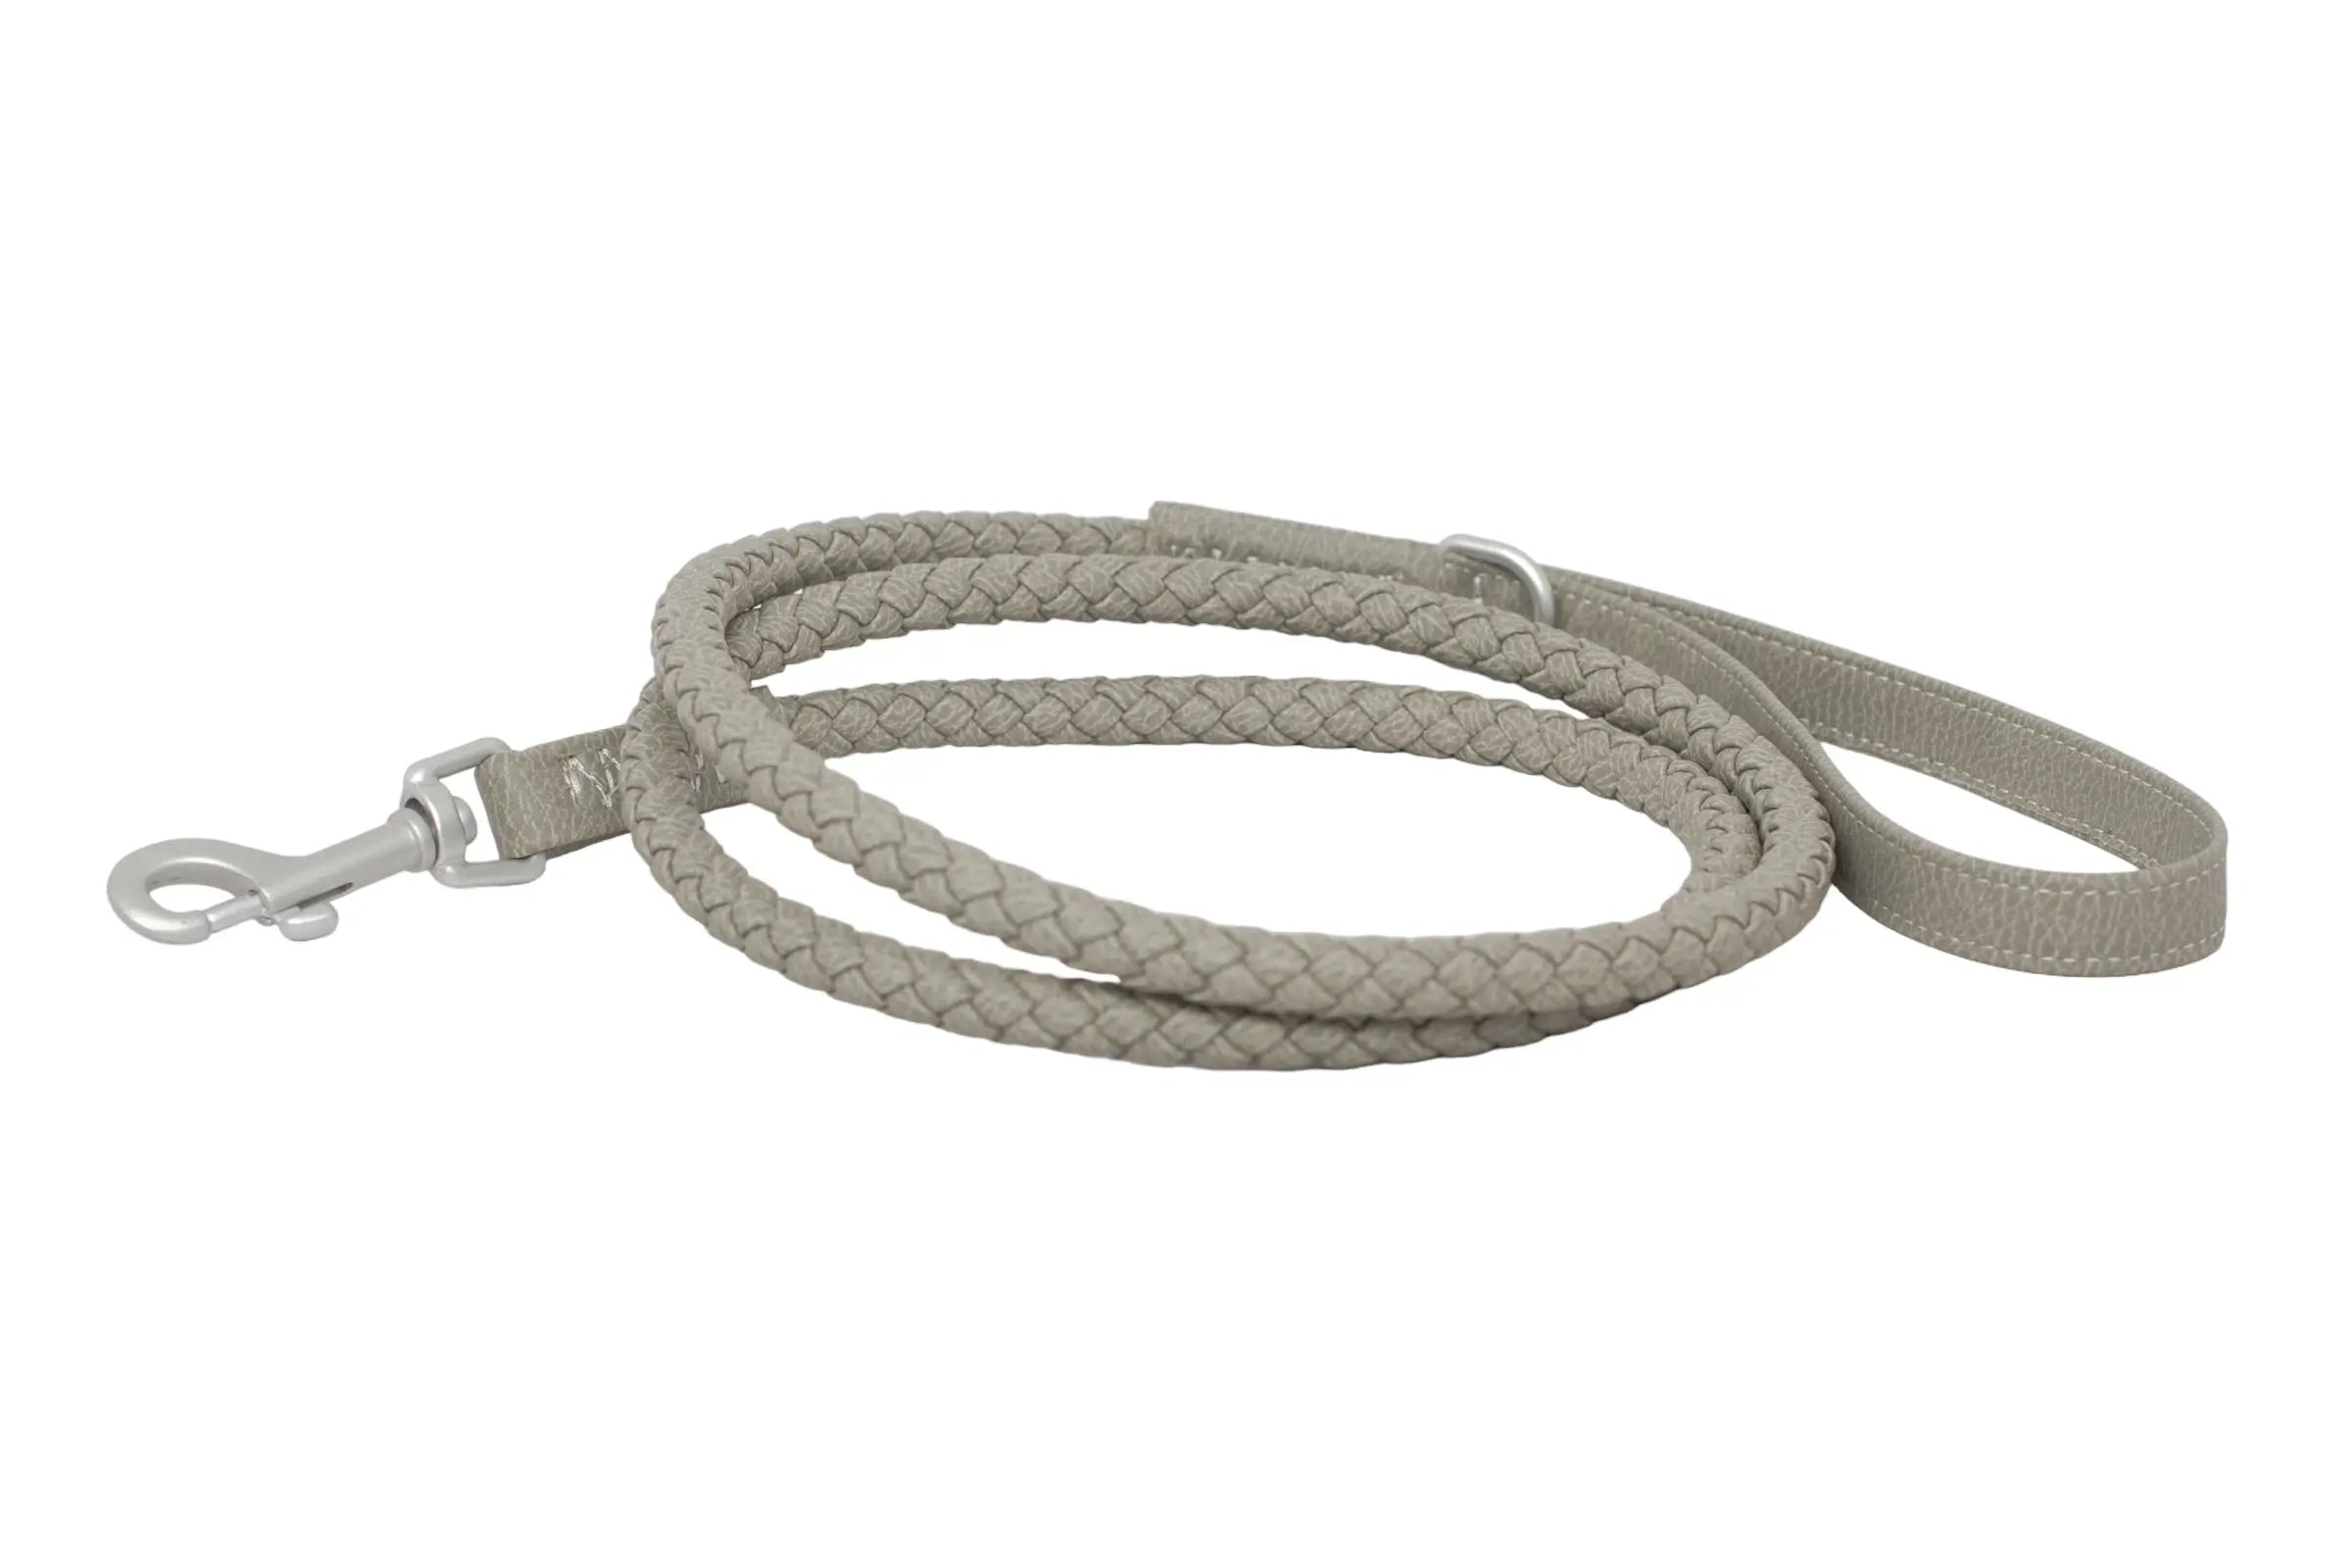 Front of a waterproof and durable dog leash with marine grade anodized aluminum hardware in the color winter gray.